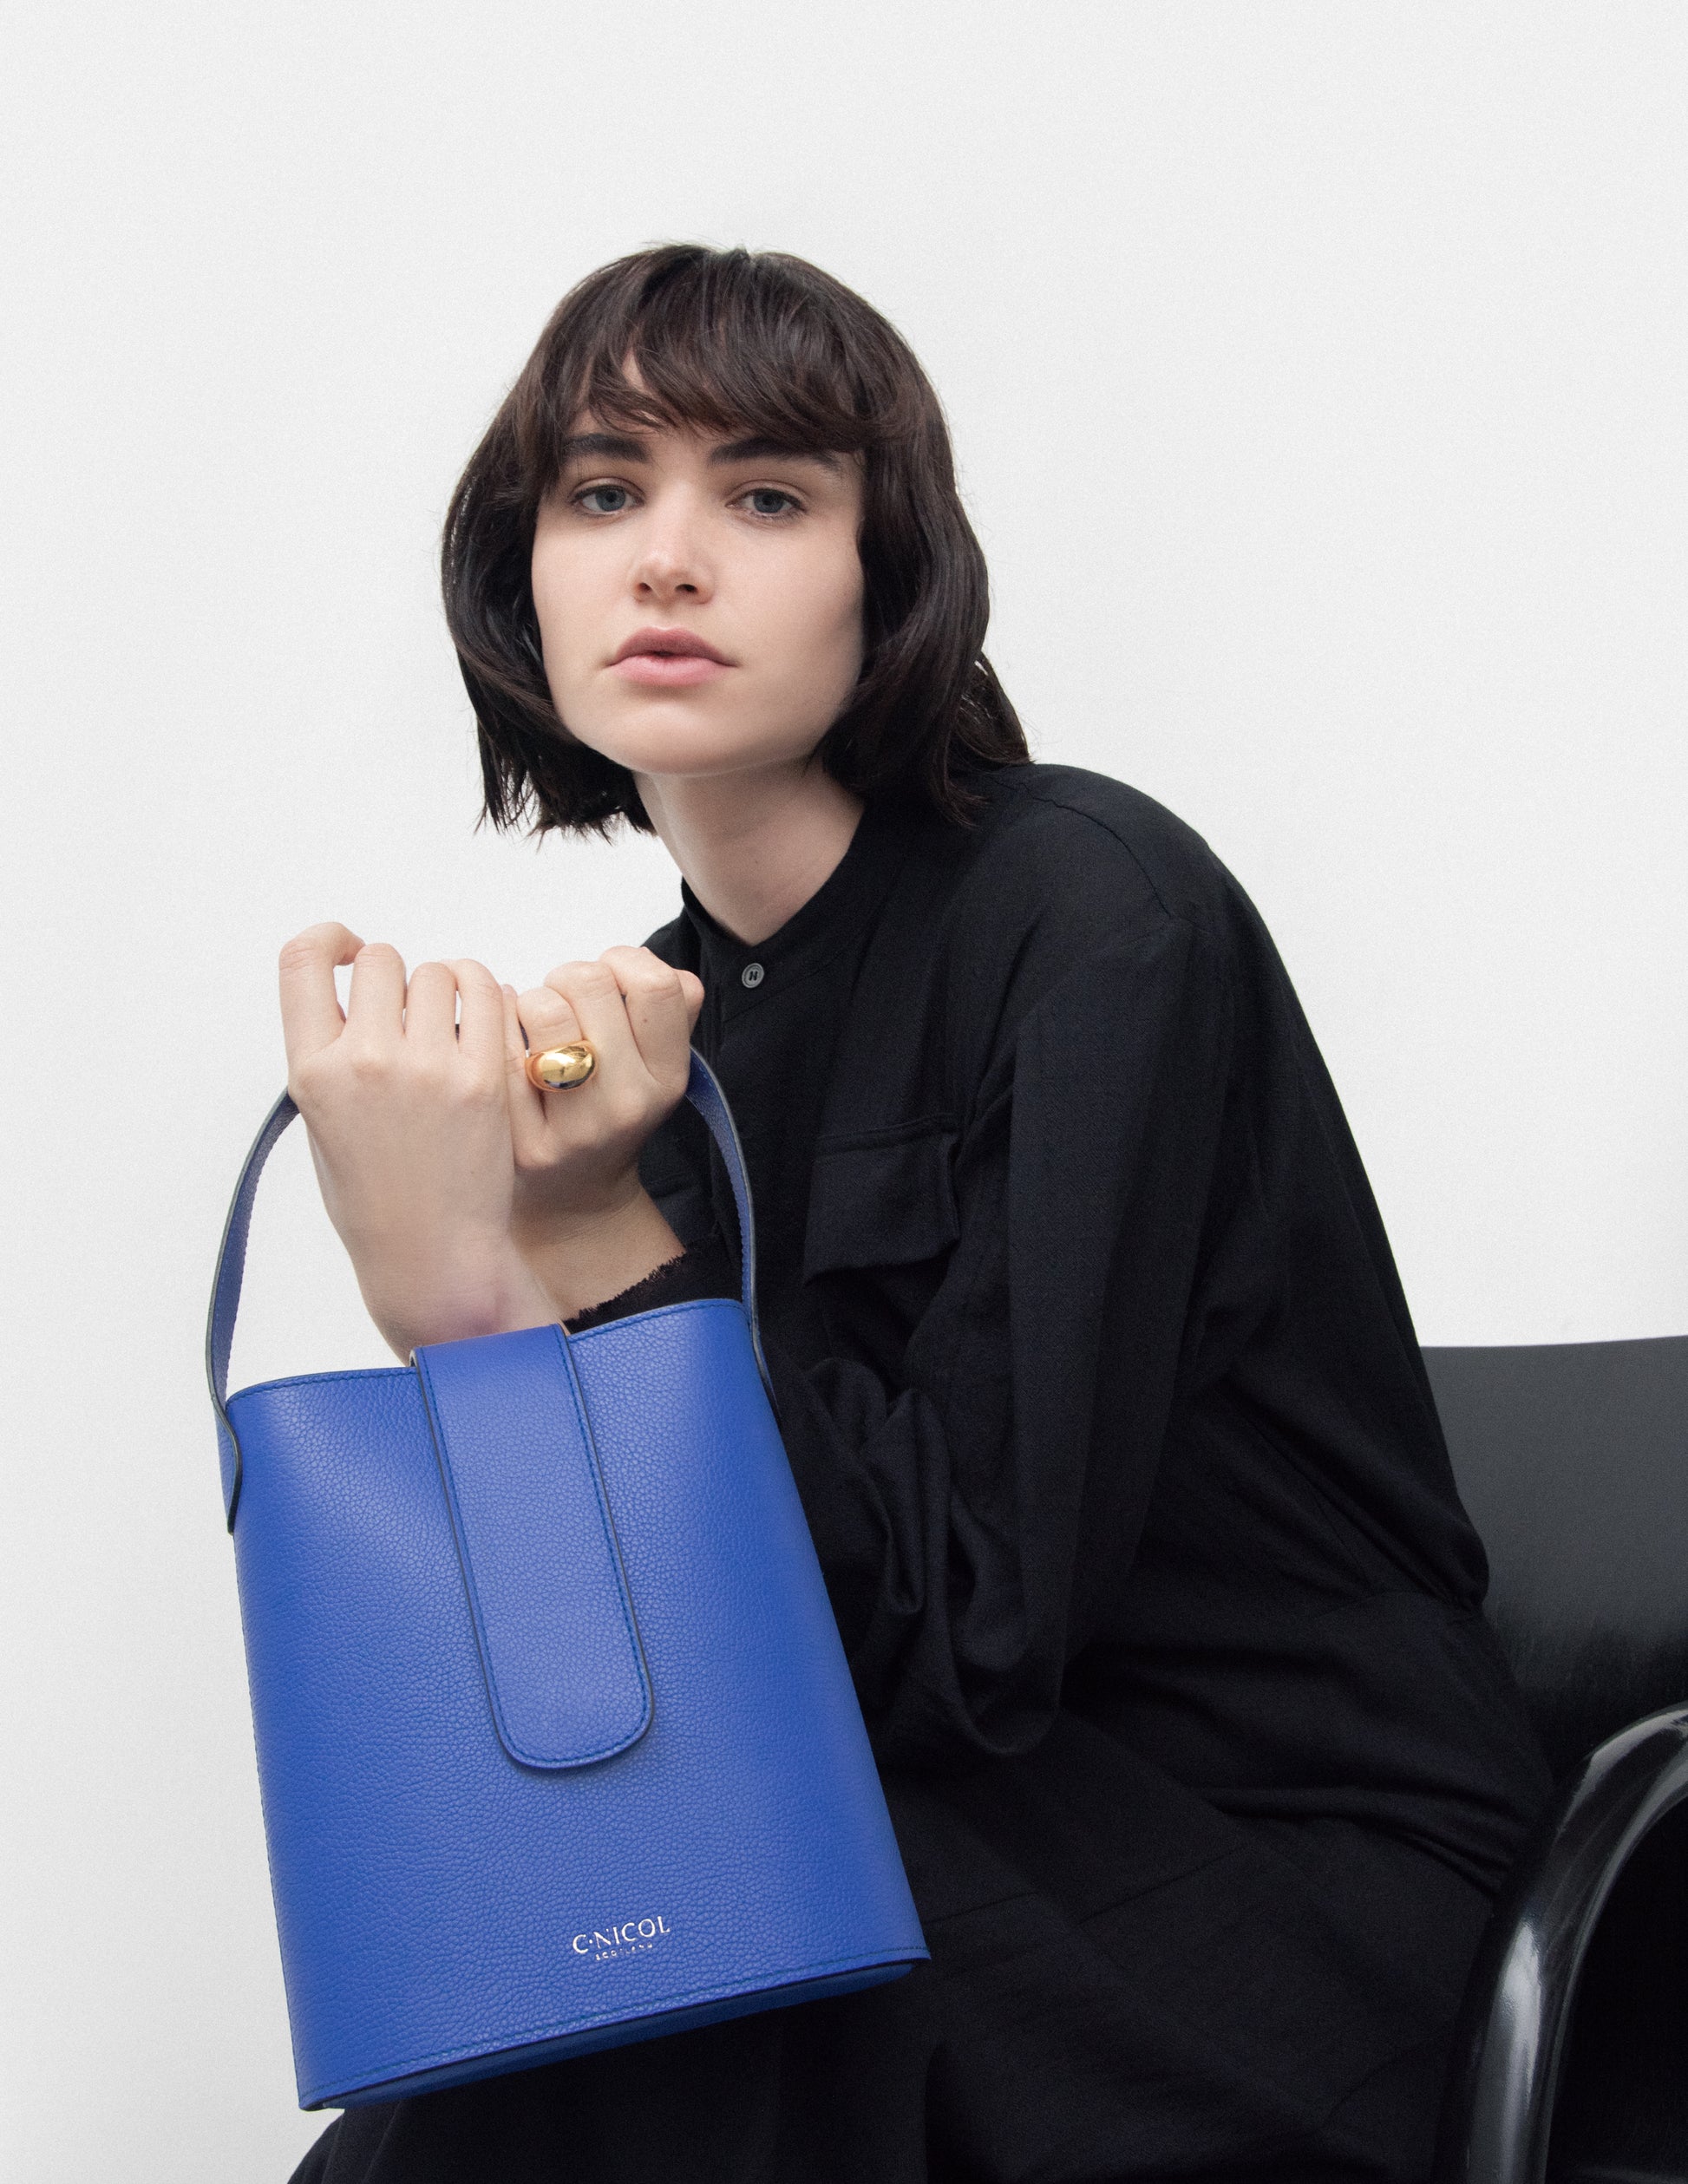 CNicol Blue Leather Holly Bag held by model dressed in all black seated on a black chair